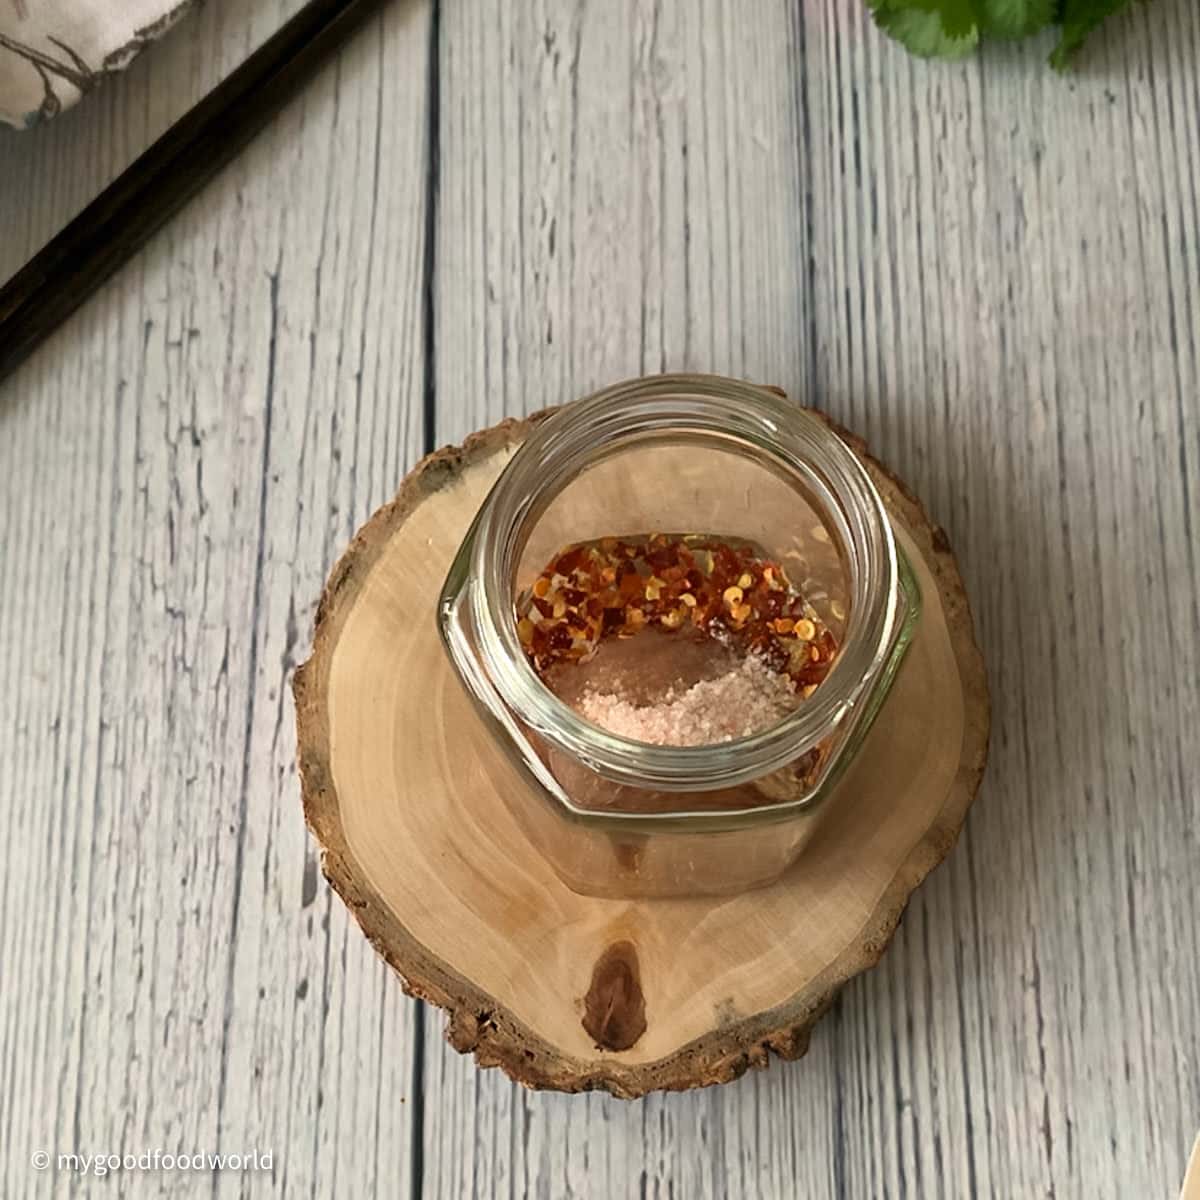 A glass jar with some red pepper flakes, salt and other ingredients are placed on a round wooden block.